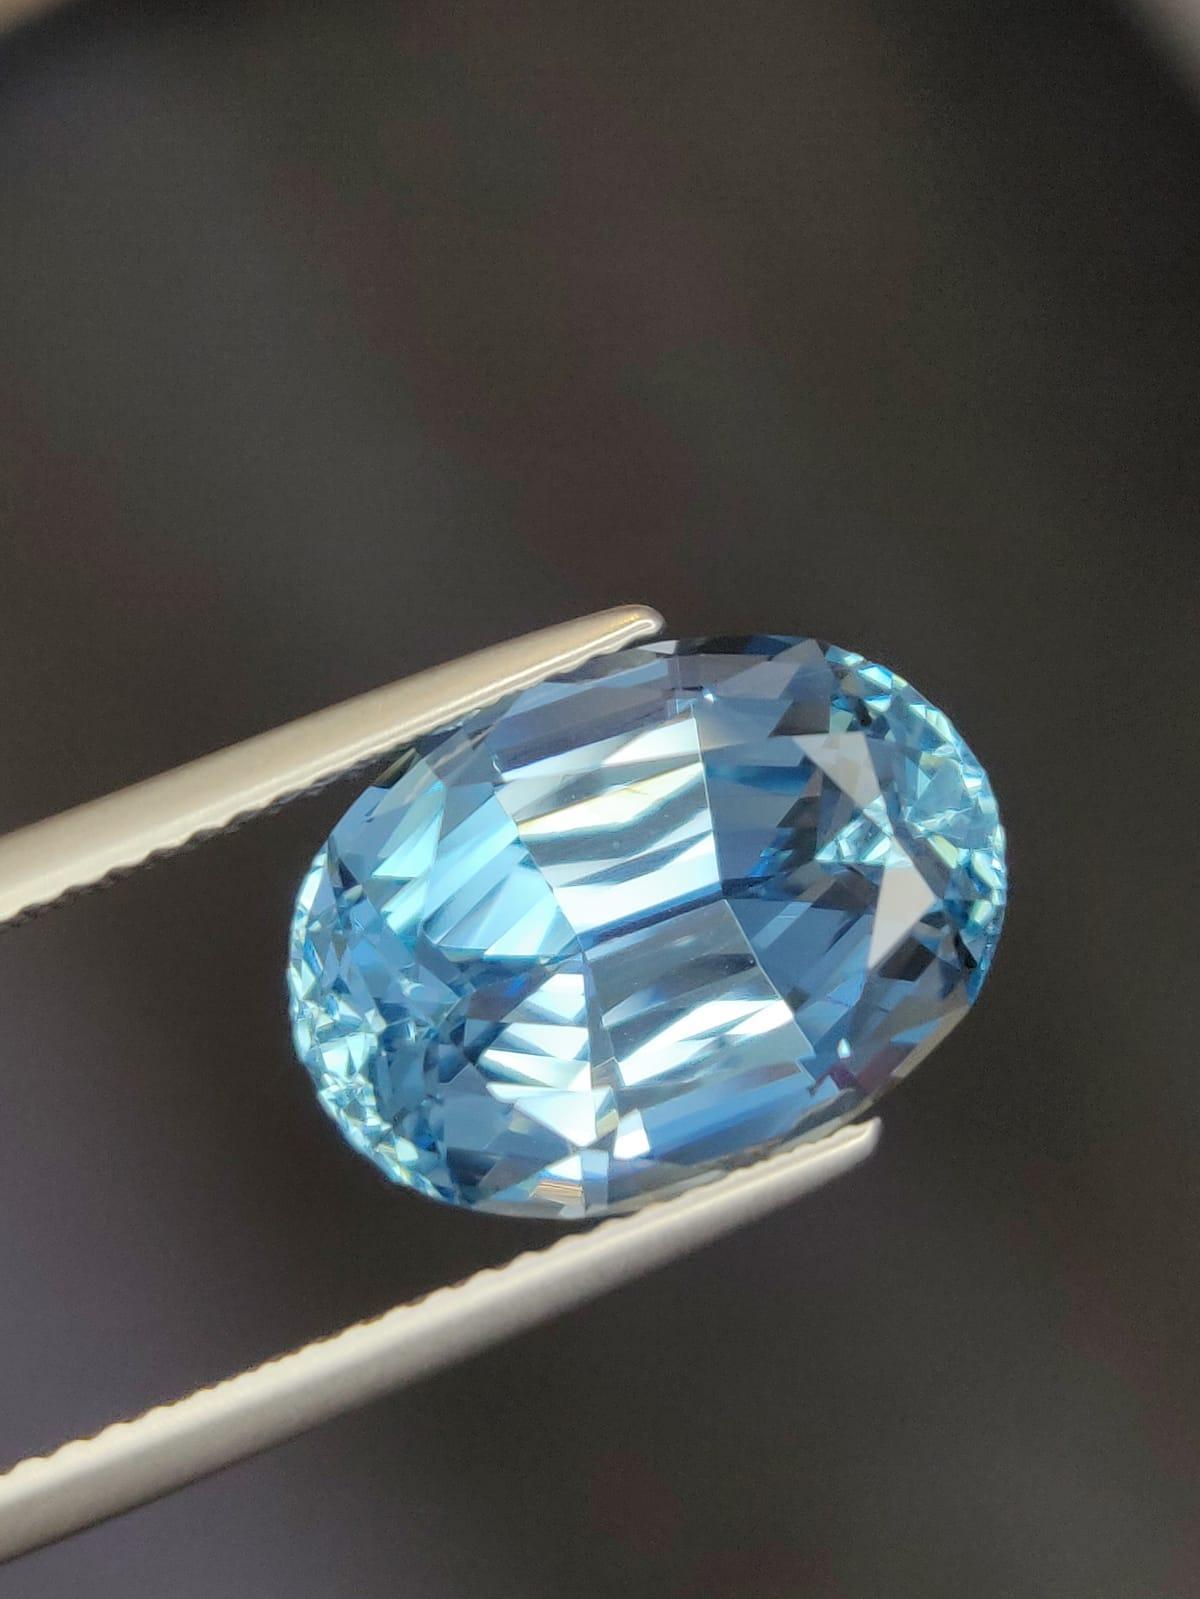 Aquamarine is the soft pale blue variety of the Beryl family of gemstones

Spiritually, aquamarine is associated with trusting and letting go. In ancient times, aquamarine was believed to be the treasure of mermaids. Sailors used the stone as a